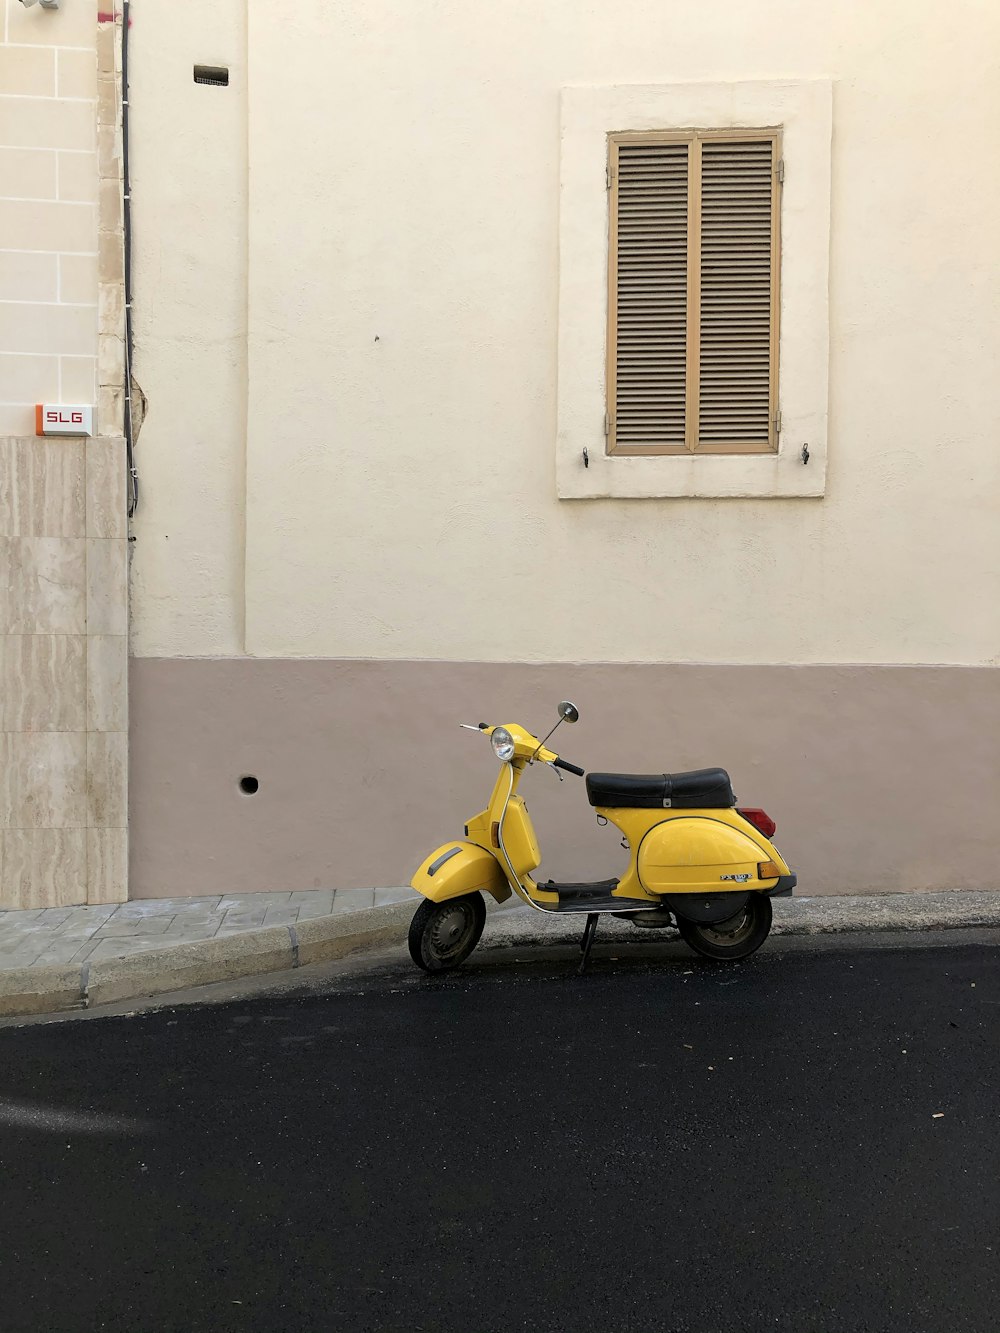 yellow and black motor scooter parked beside white concrete building during daytime